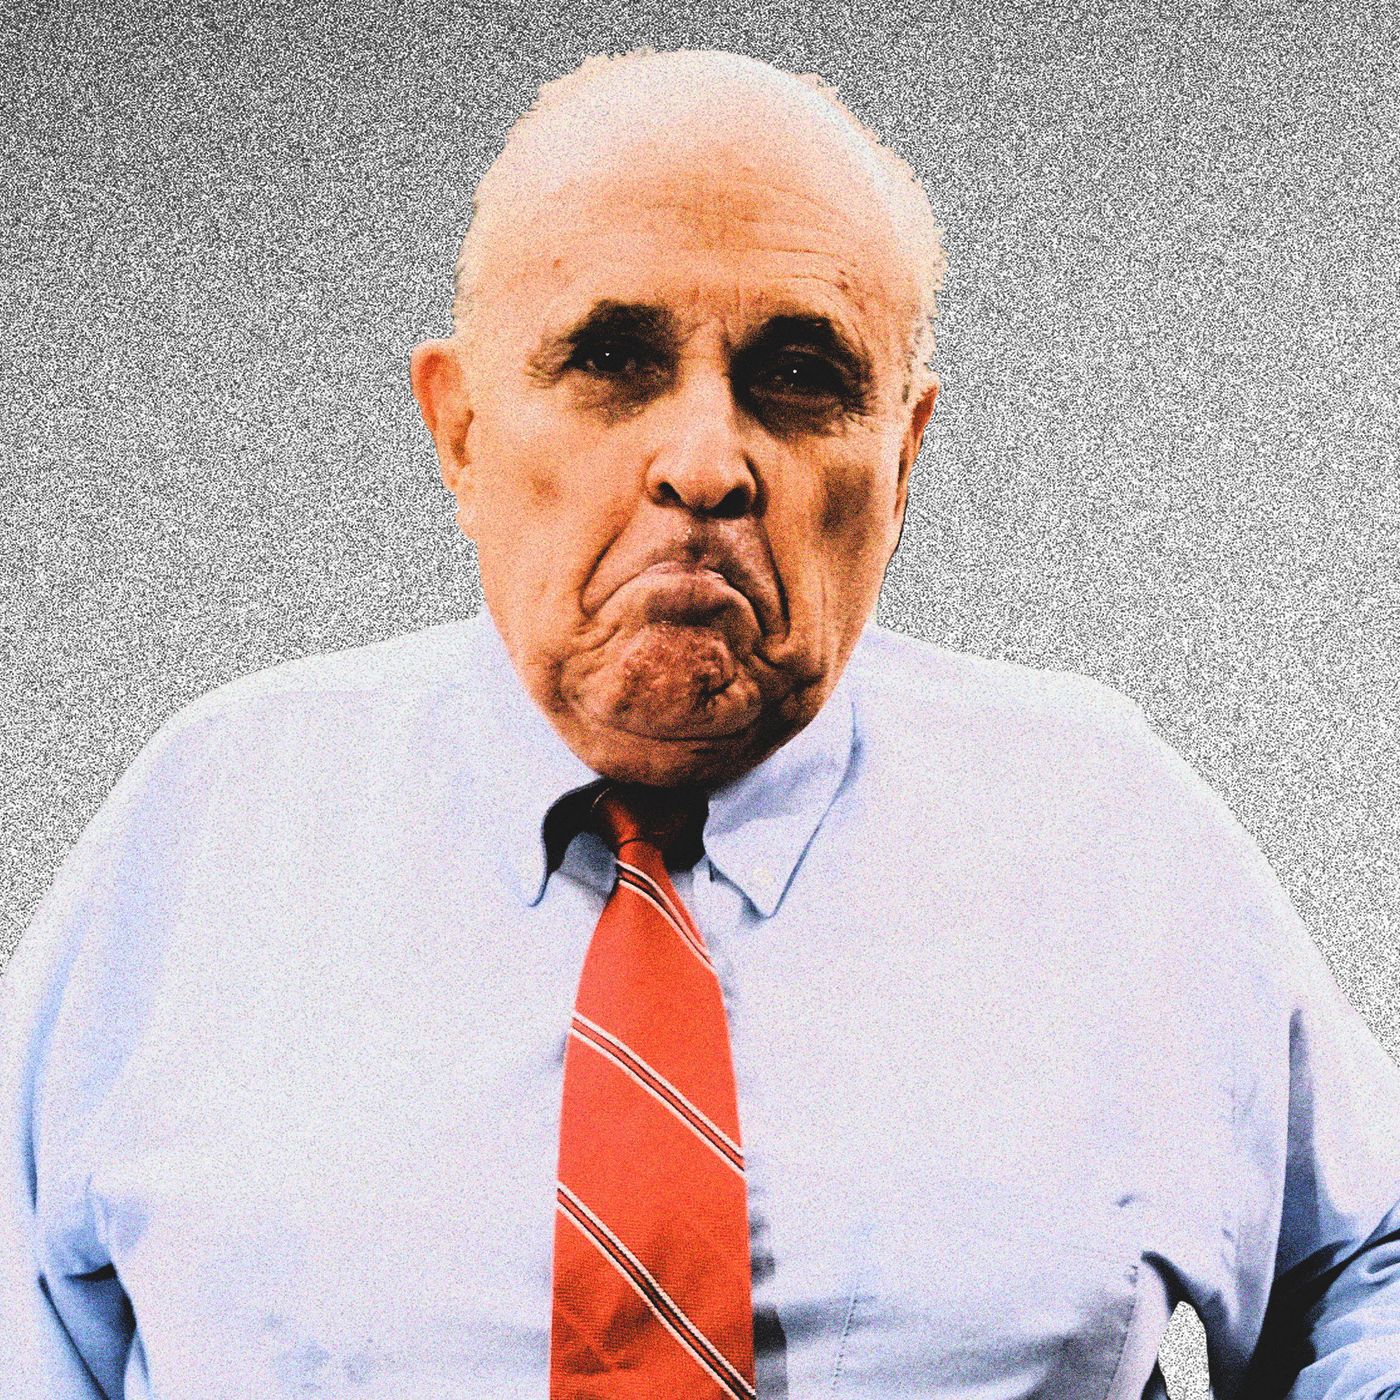 Rudy Giuliani Where Is Trumps Former Attorney Today?